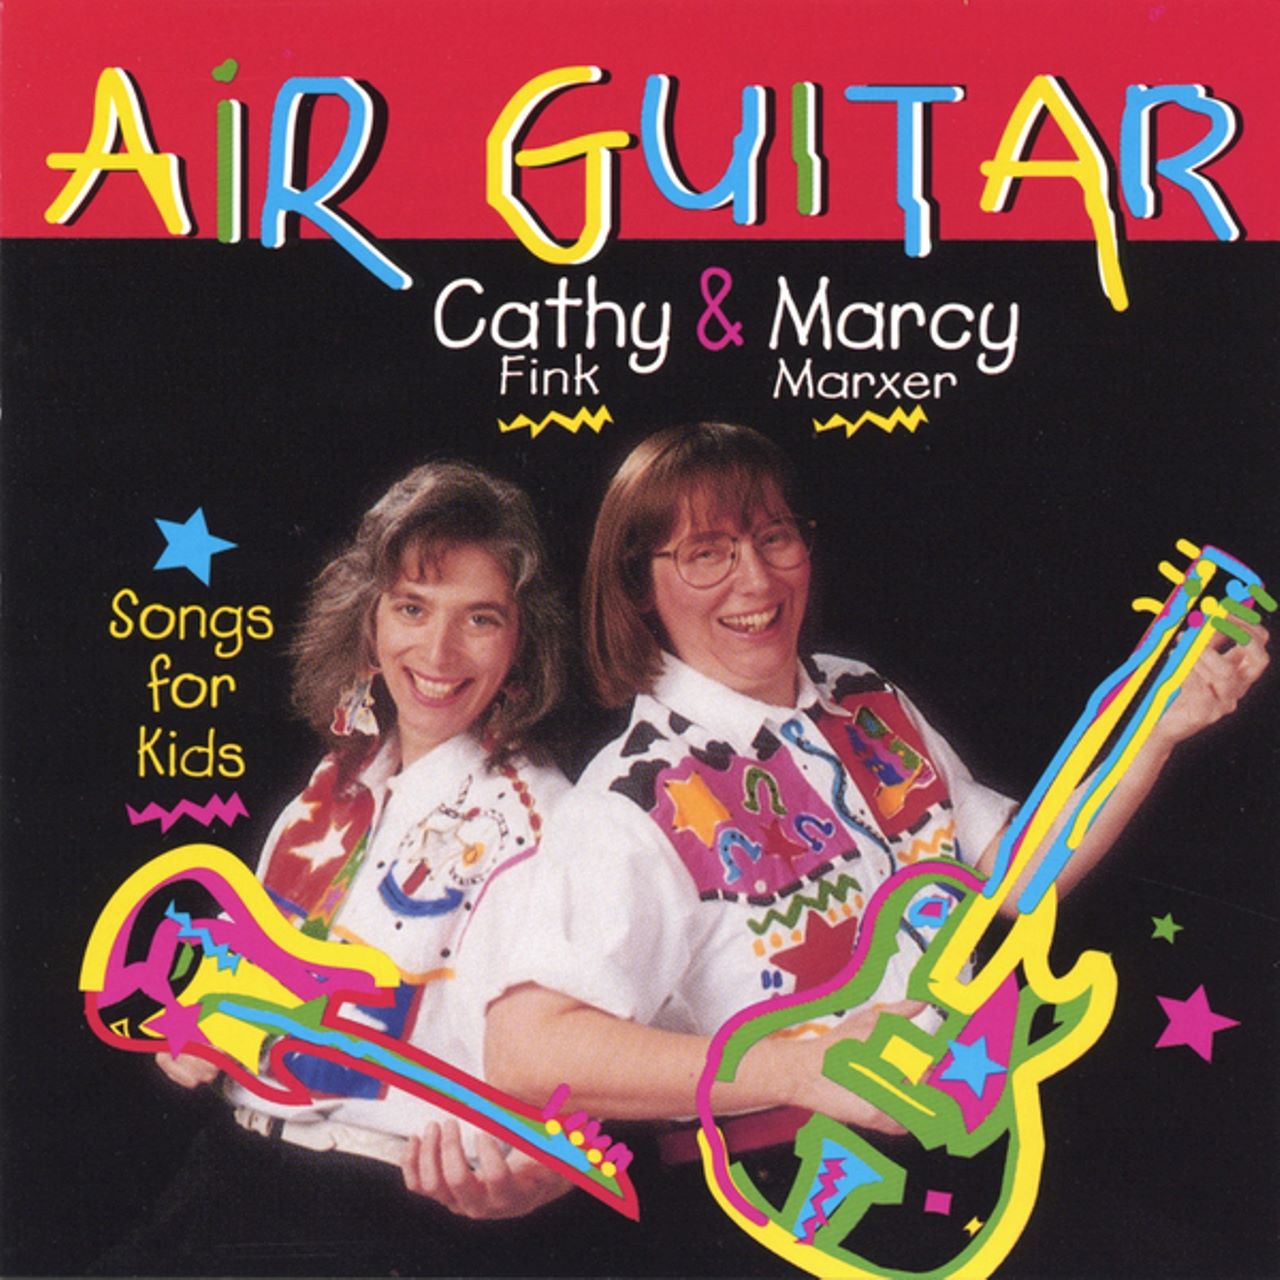 Cathy Fink & Marcy Marxer - Air Guitar cover album